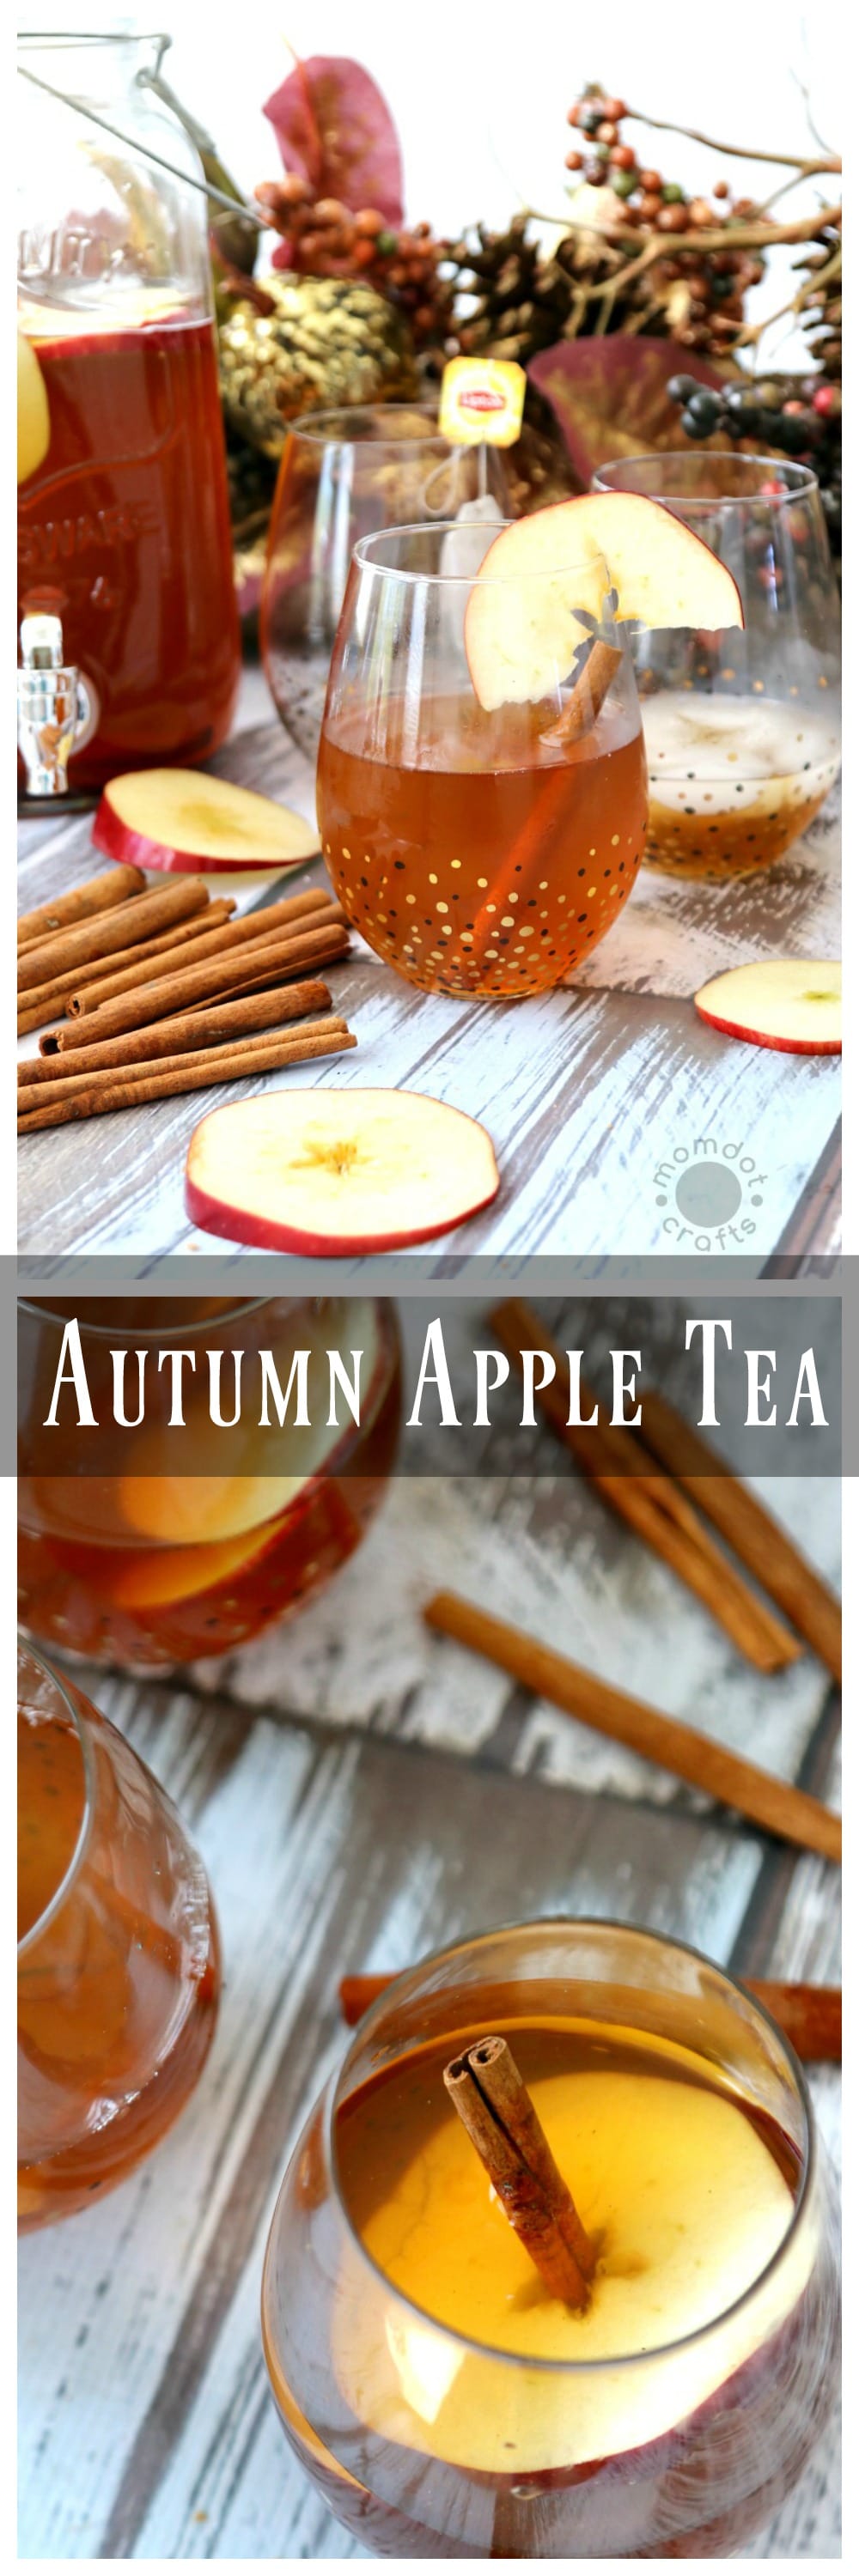 Autumn tea made with Apple juice and Lipton tea in fancy classes with cinnamon stick and apple slice garnish.